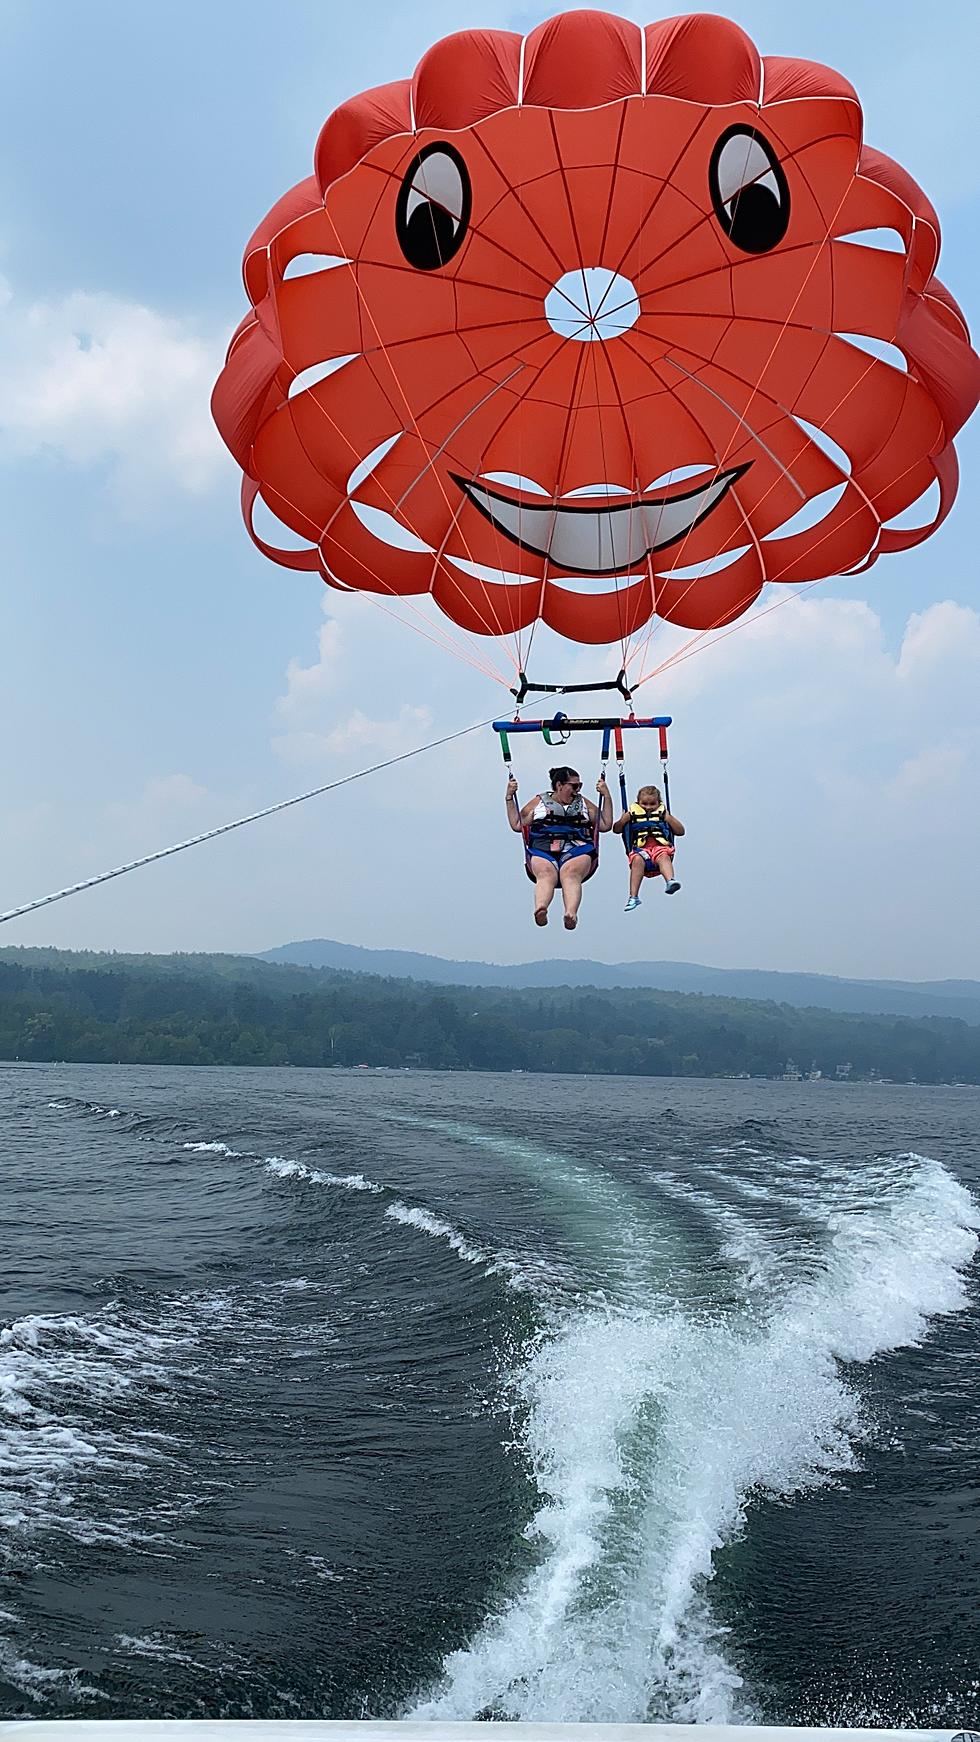 Opinions Needed:  Was Taking My Child Parasailing Irresponsible?